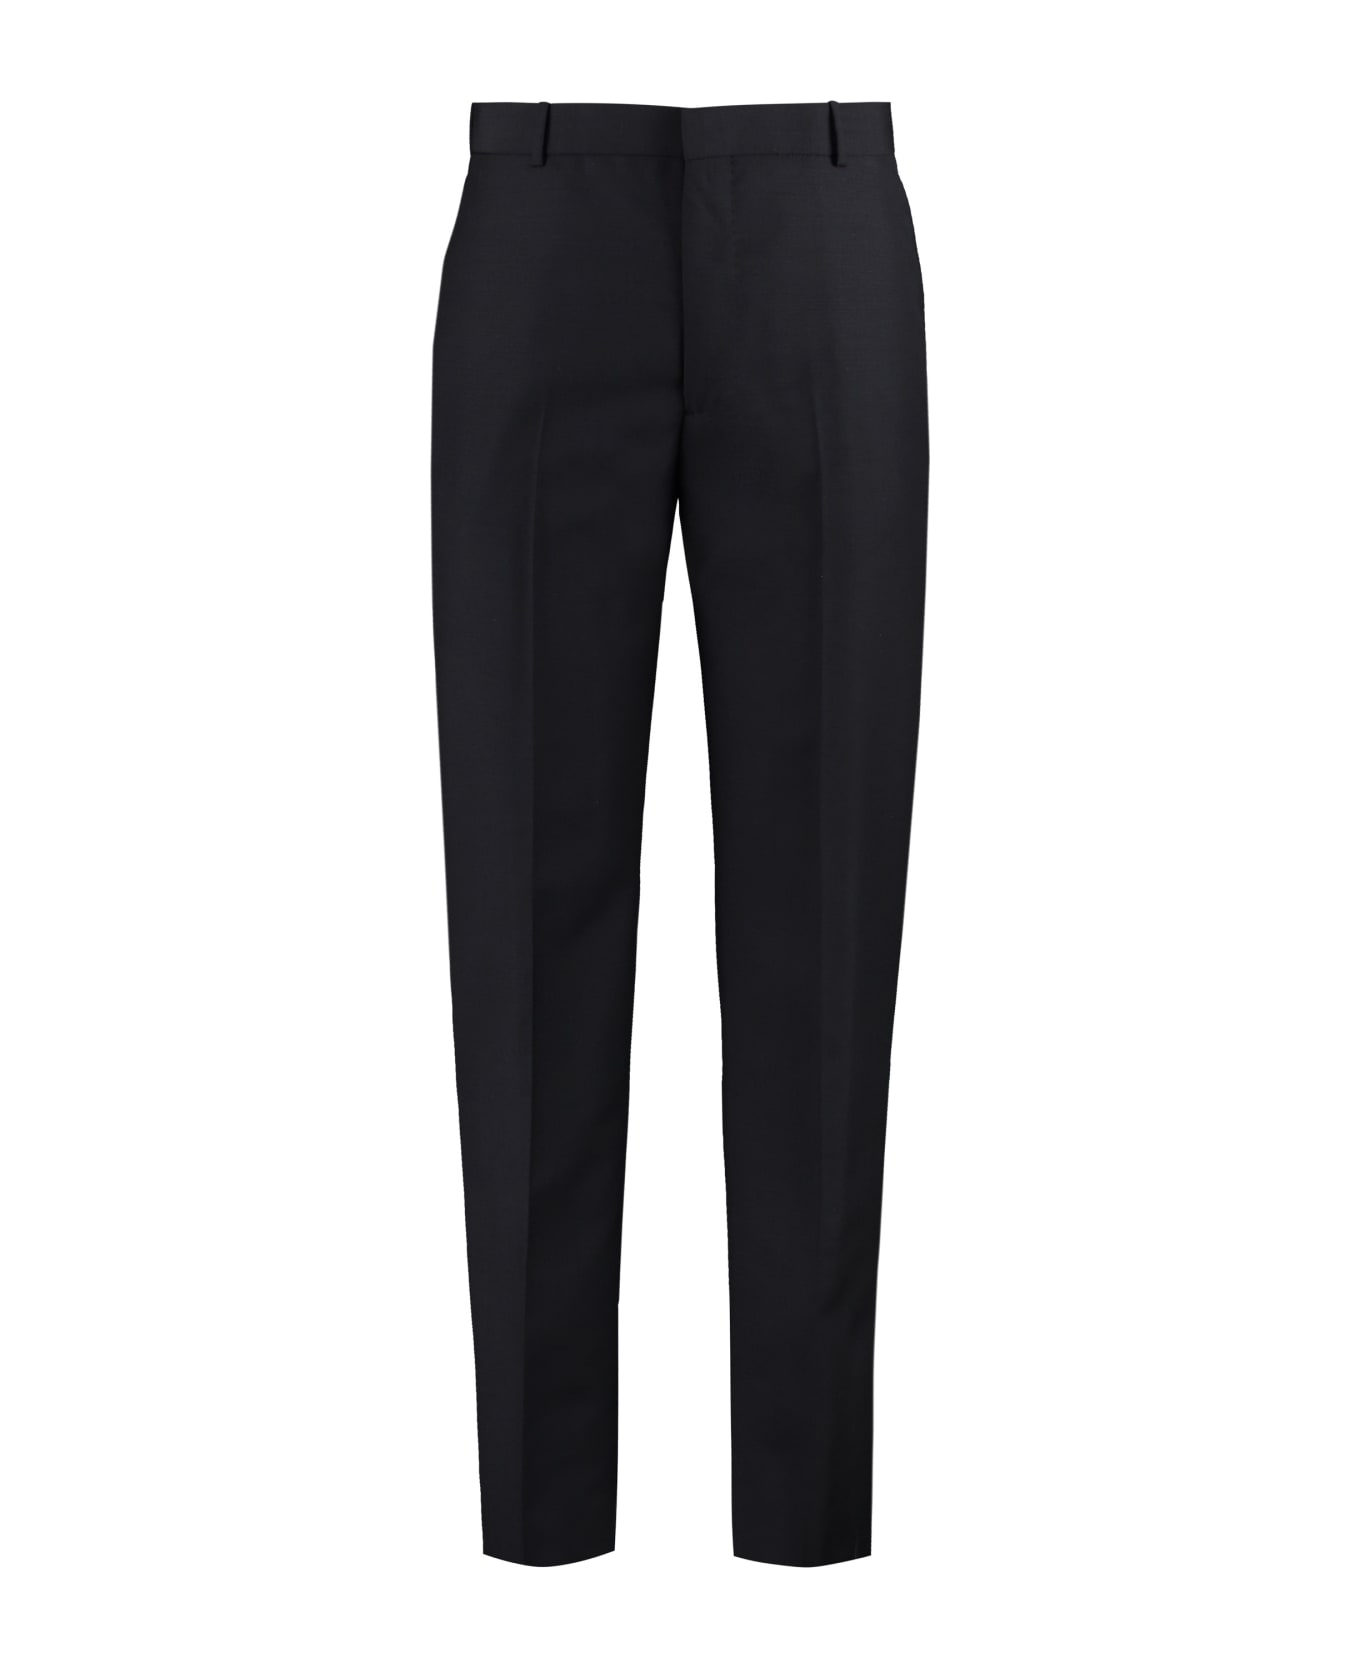 Alexander McQueen Wool Blend Tailored Trousers - black ボトムス